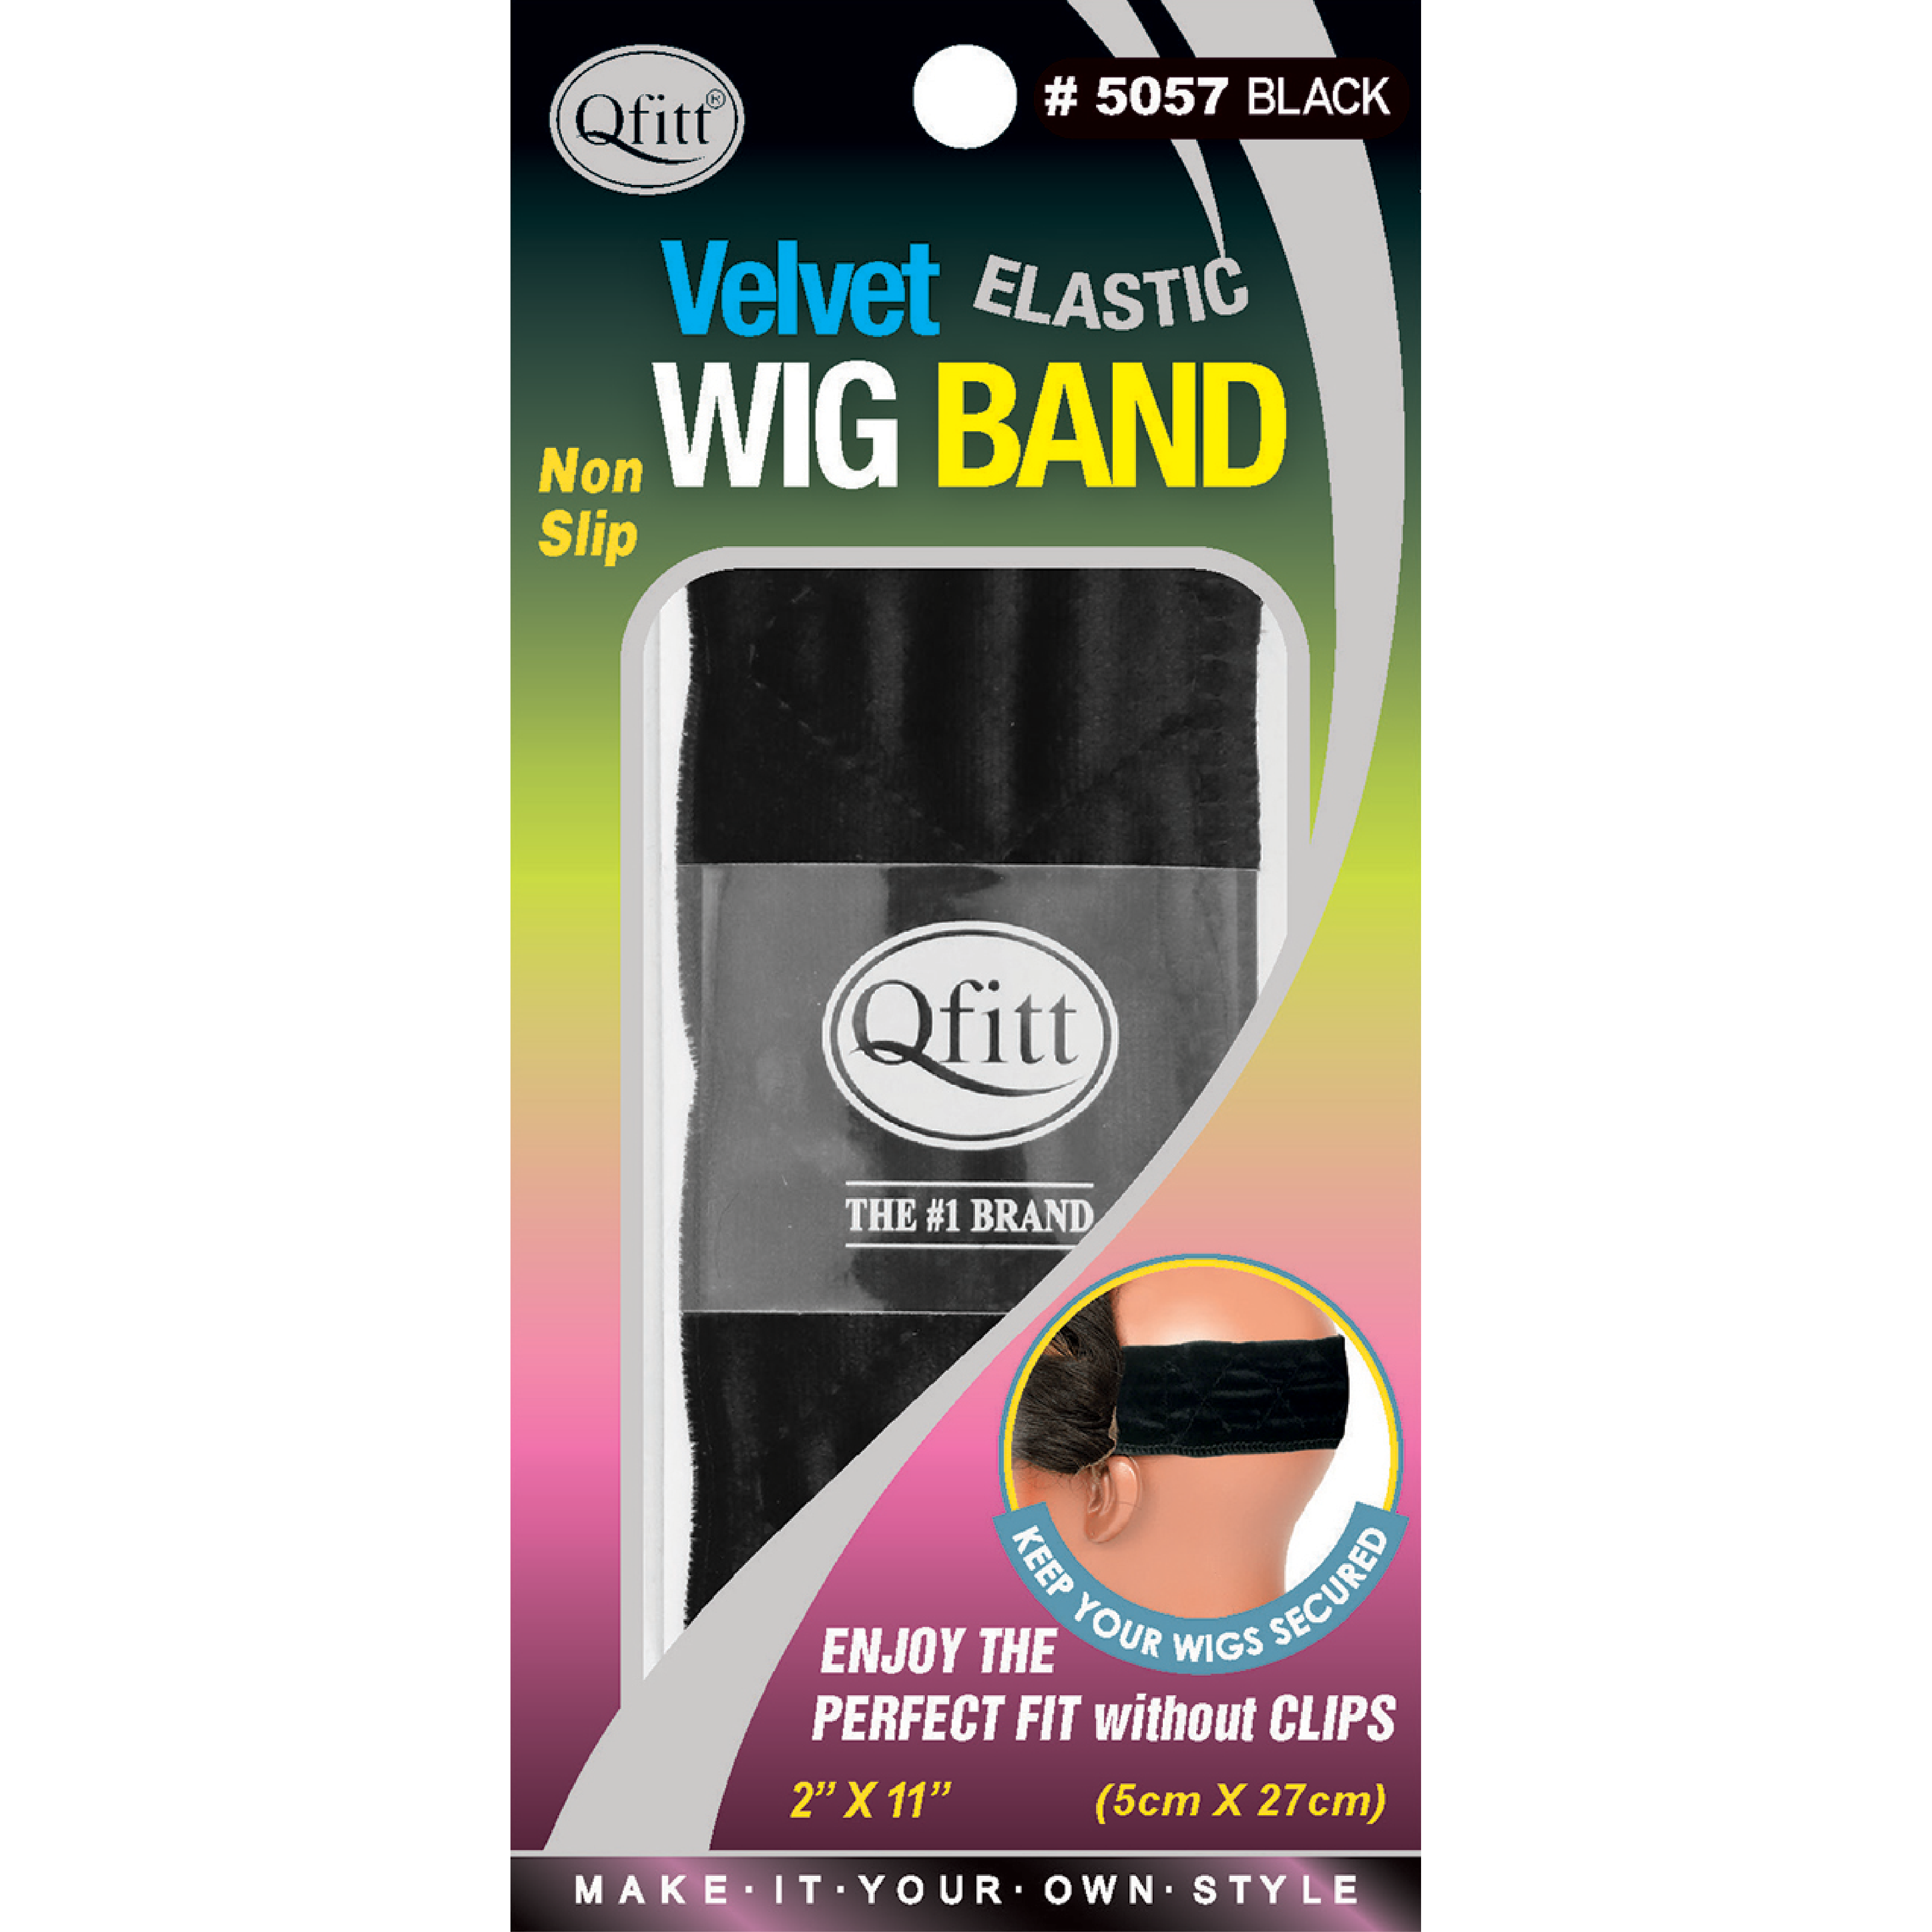 Elastic Band For Wig Lace Melting Elastic Front Laying Strap